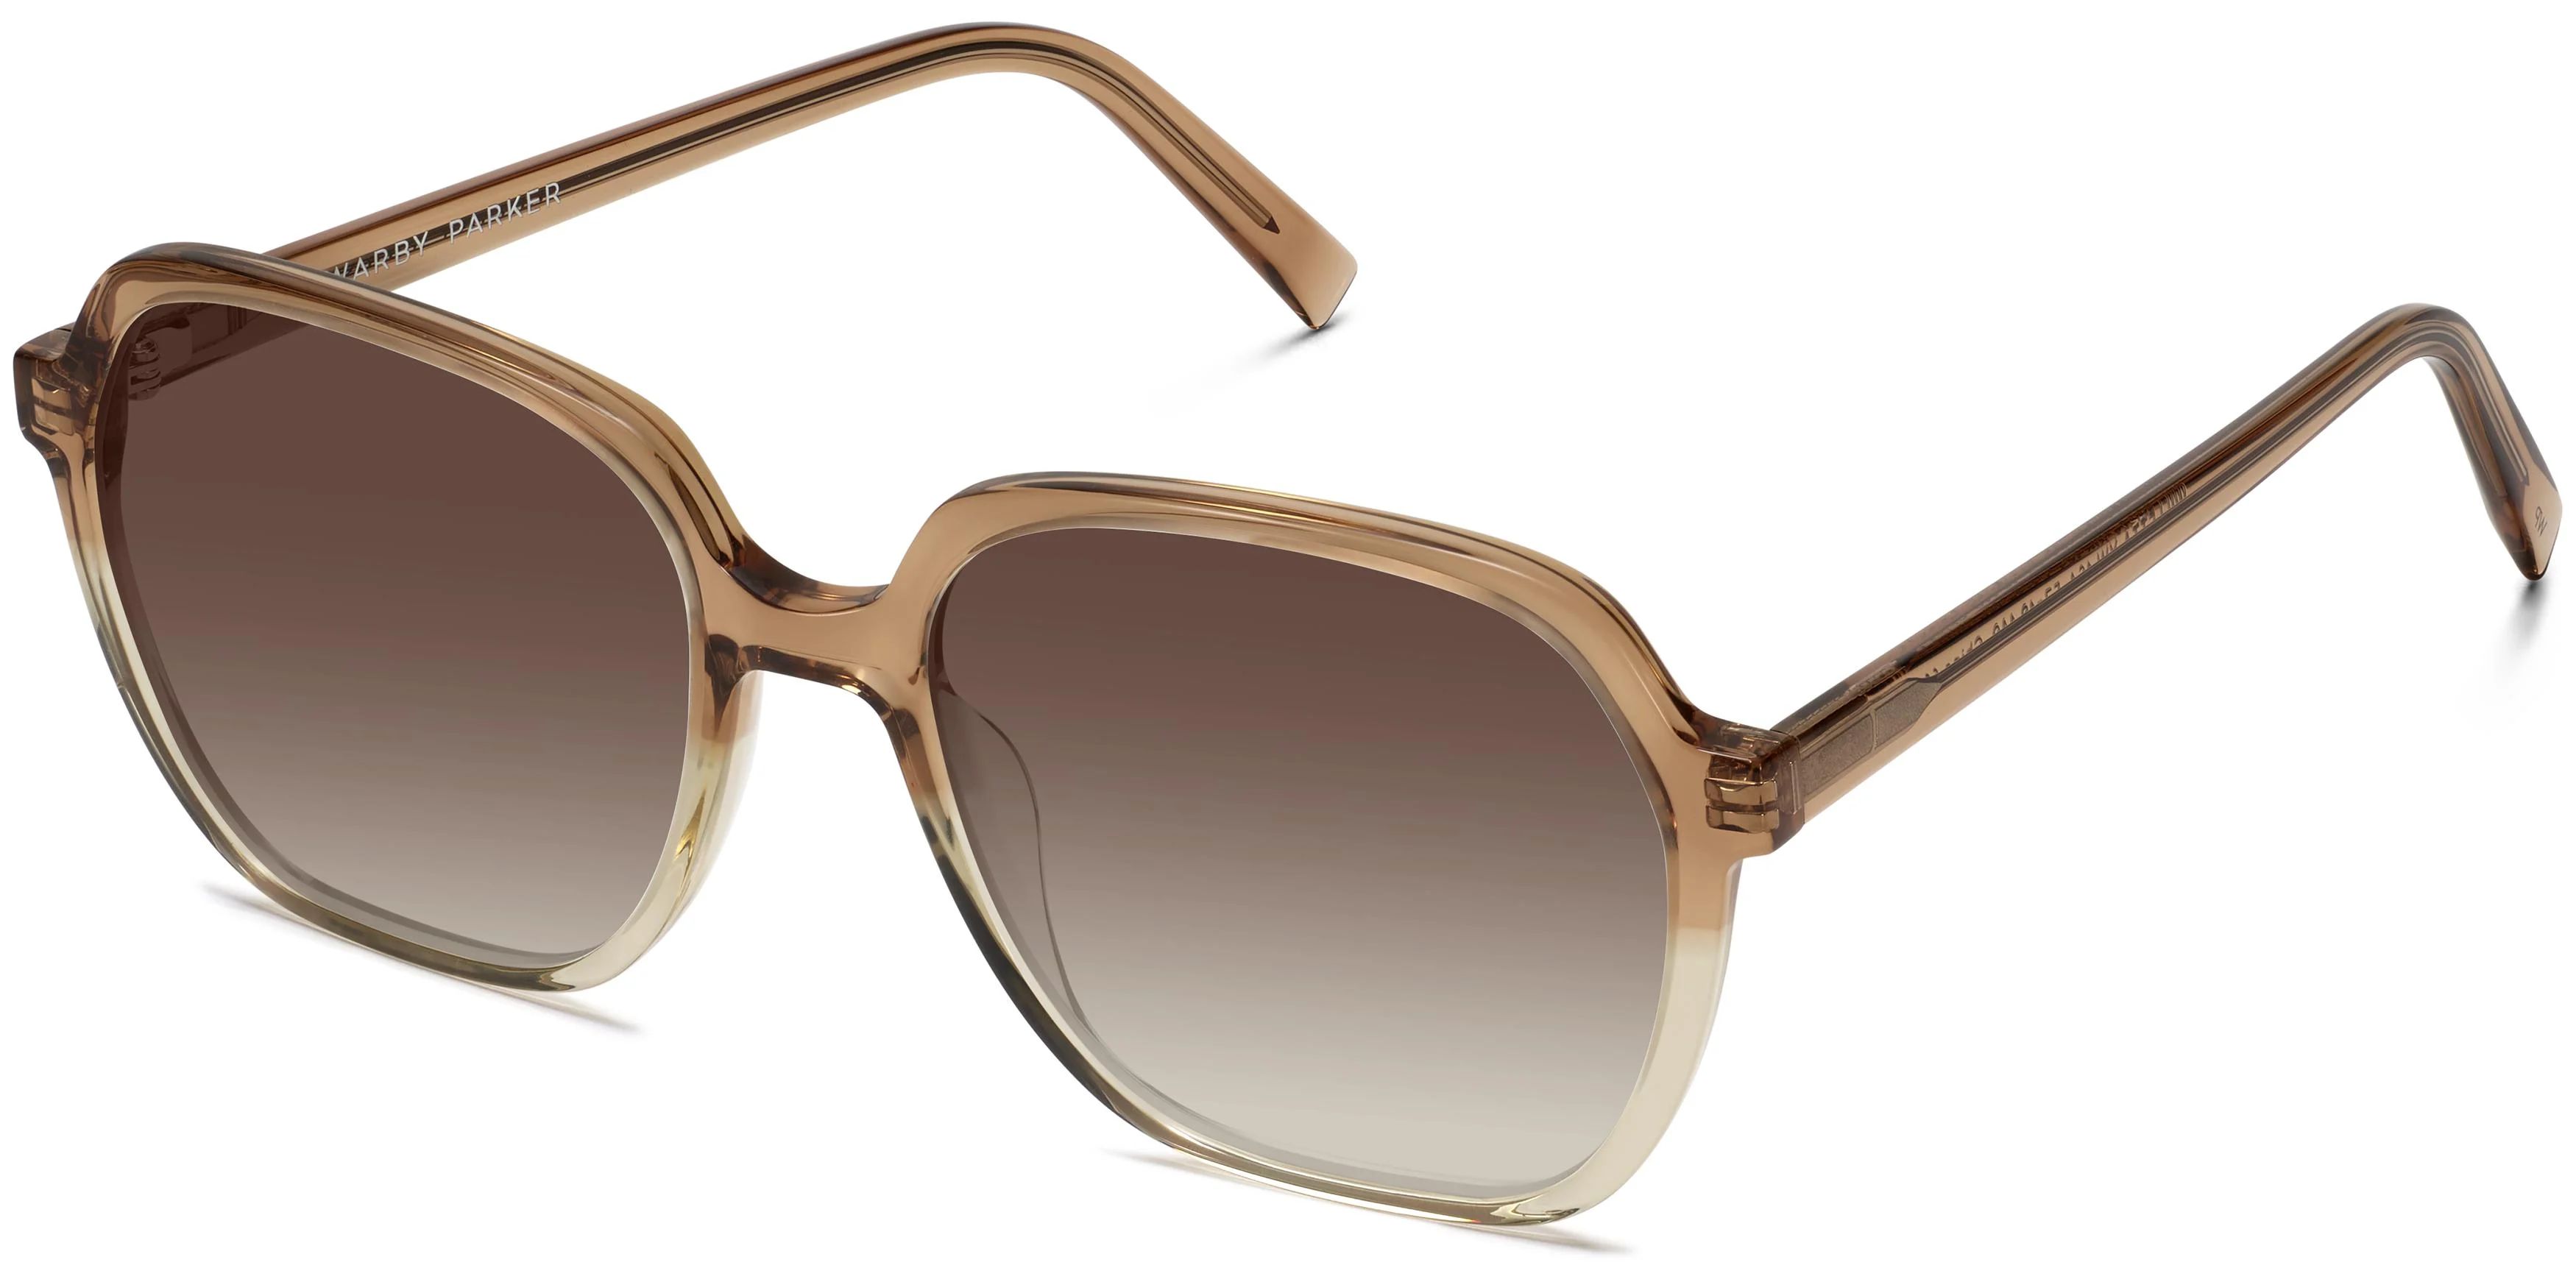 Willetta Sunglasses in Chai Crystal Fade | Warby Parker | Warby Parker (US)